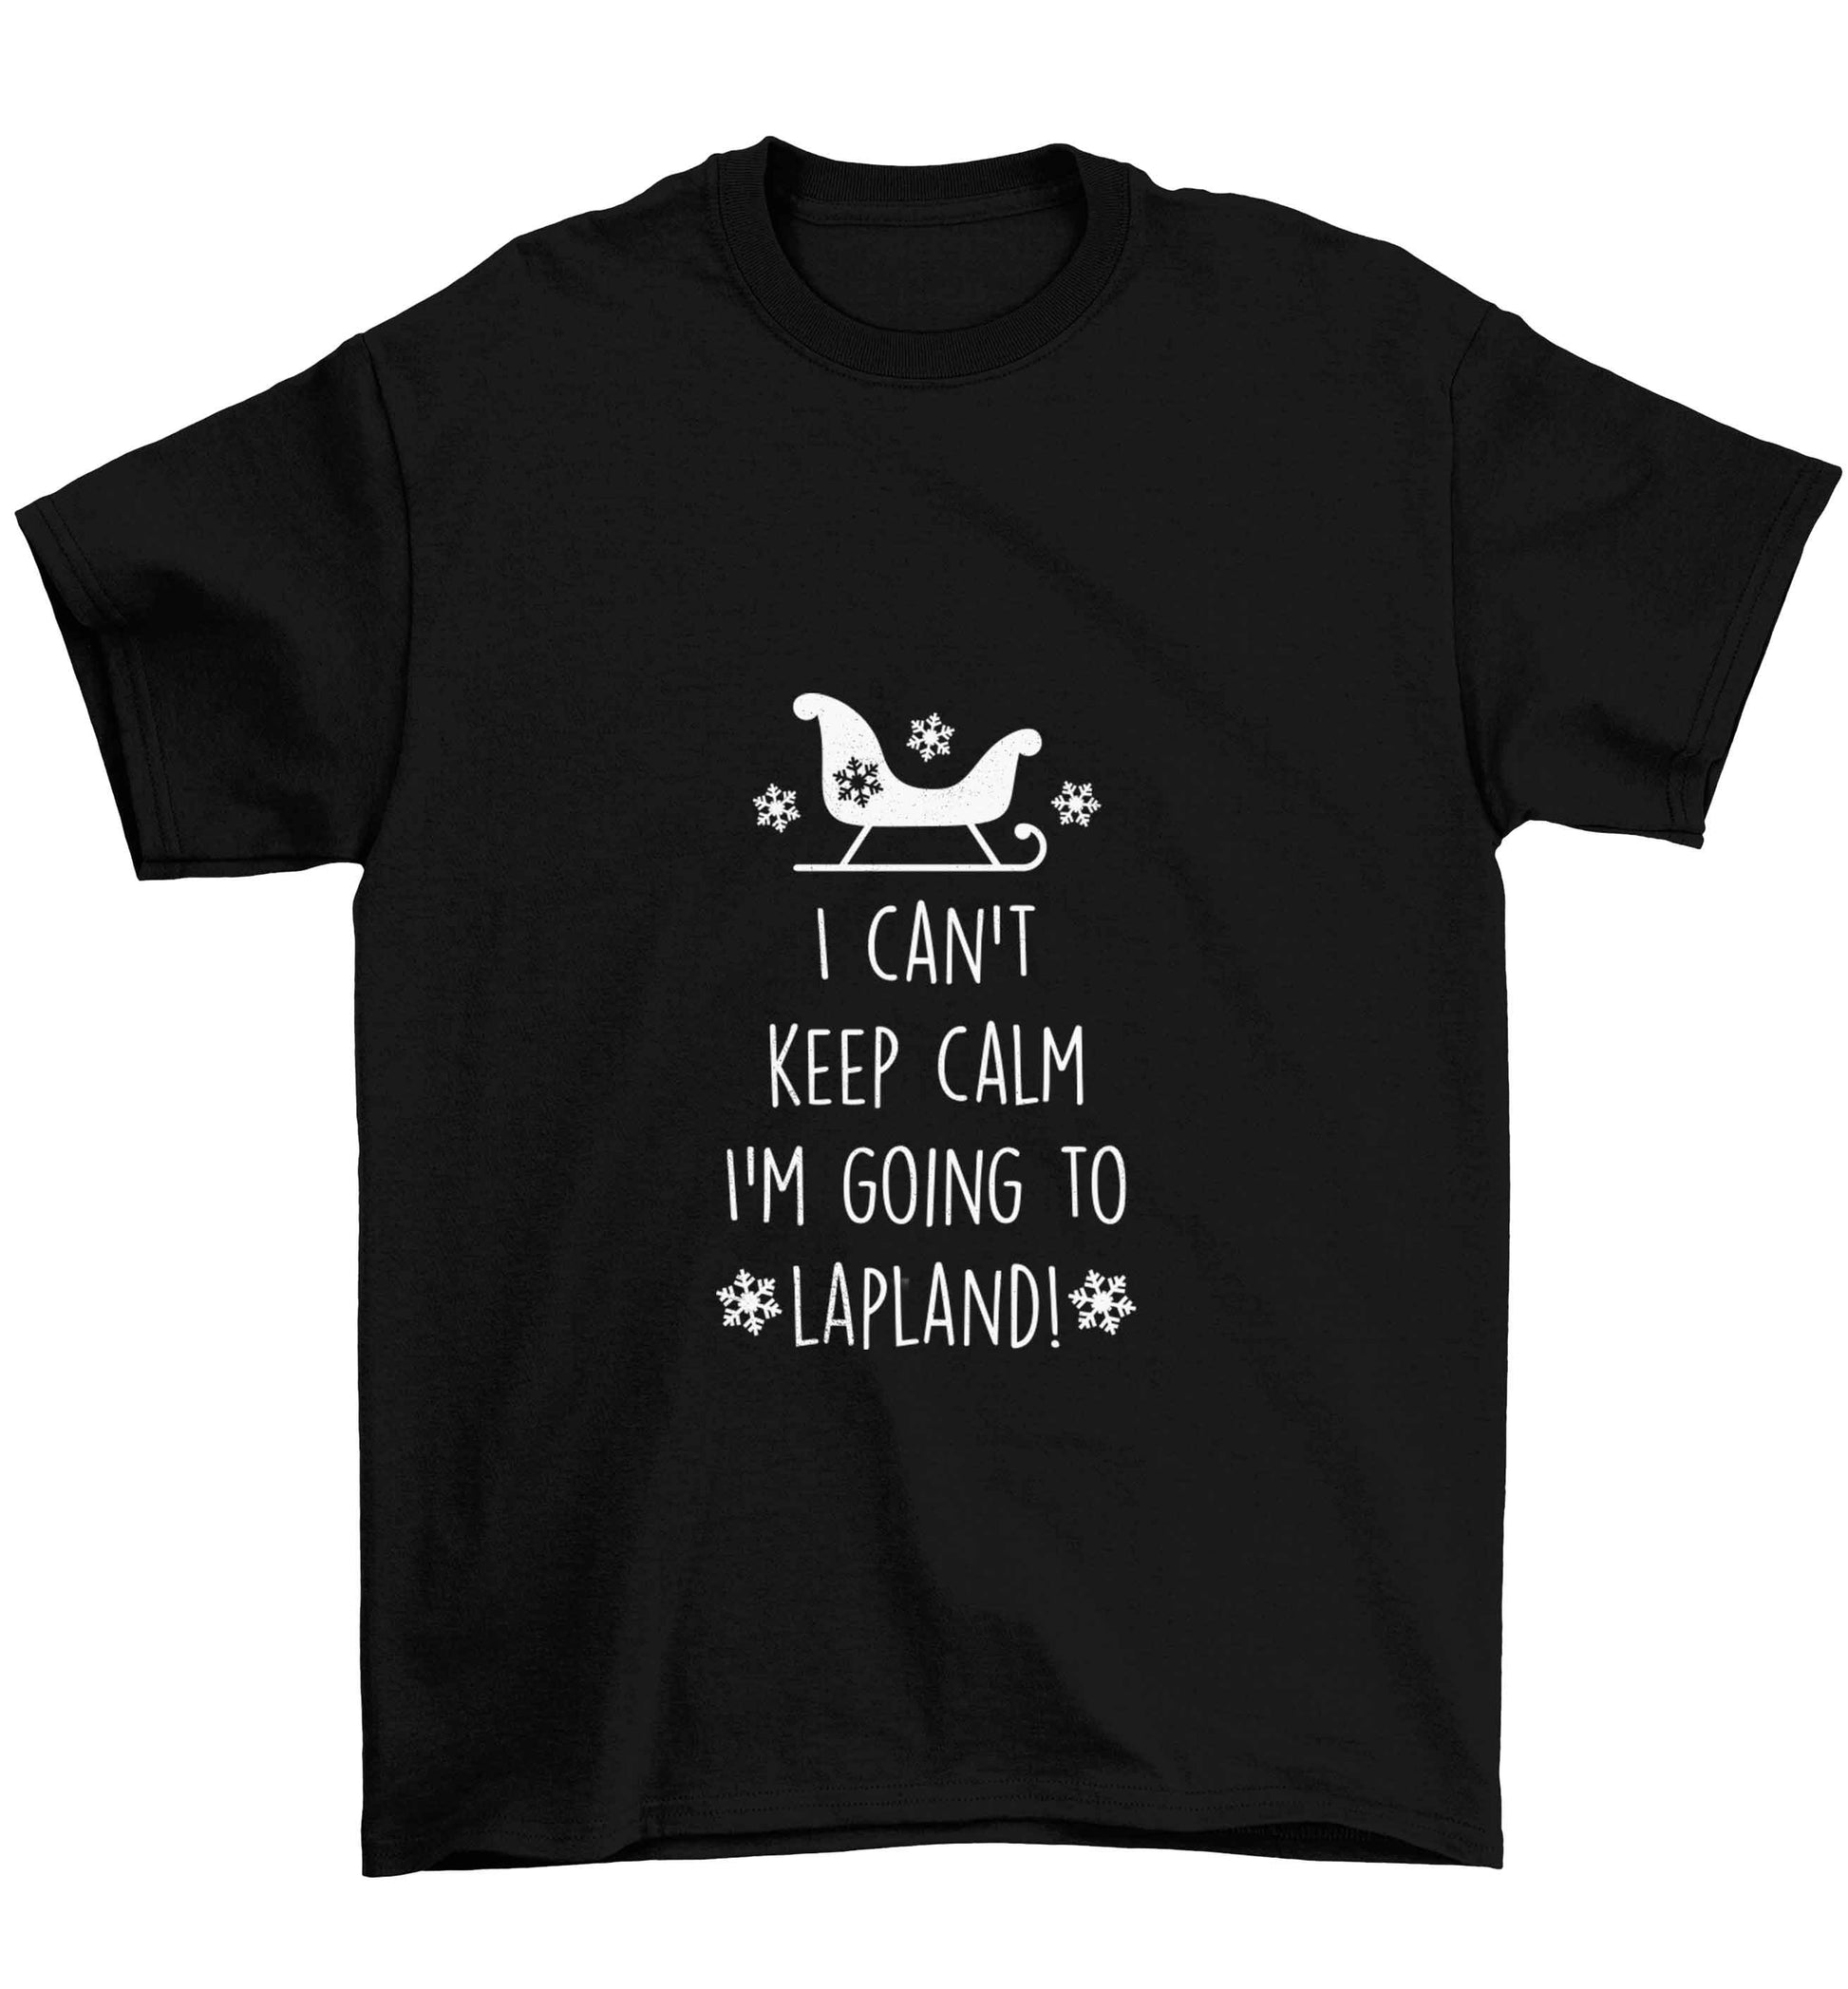 I can't keep calm I'm going to Lapland Children's black Tshirt 12-13 Years